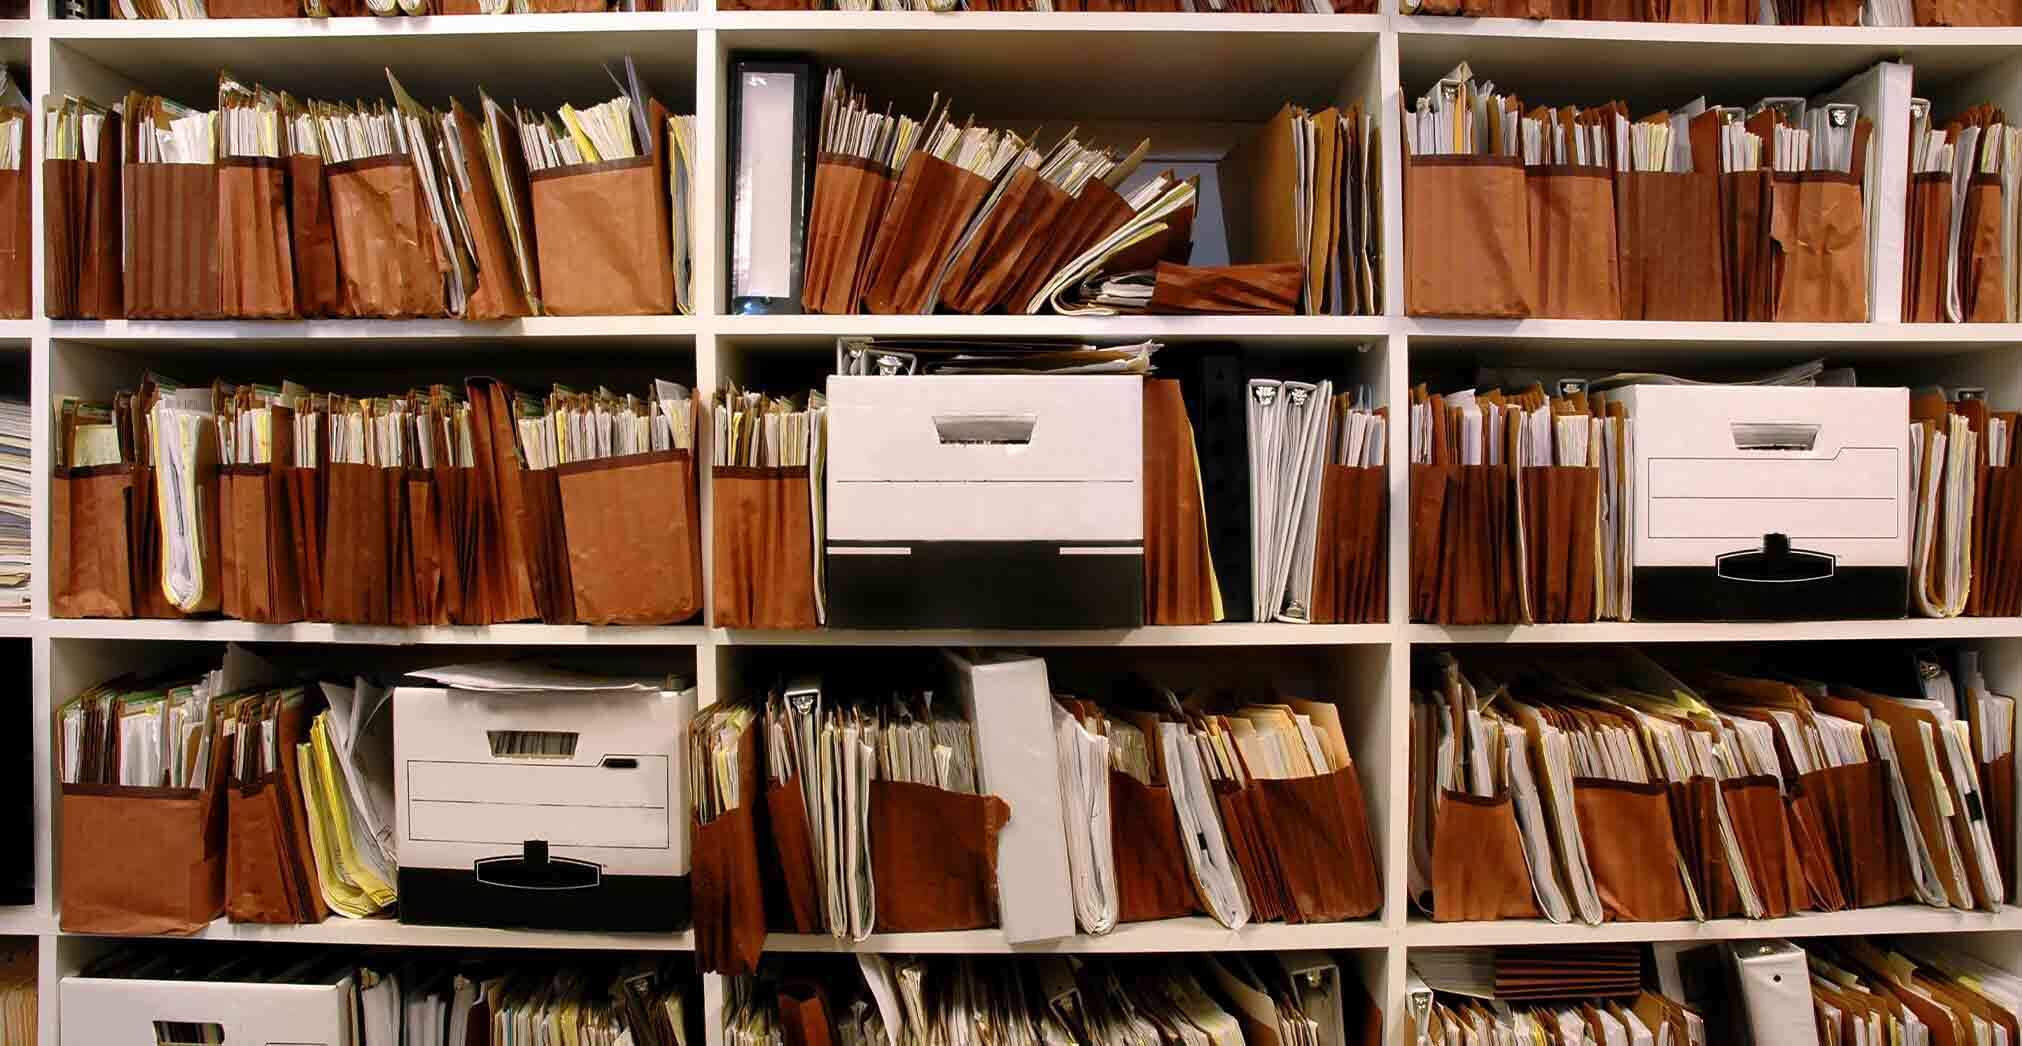 Shelving with archived document folders